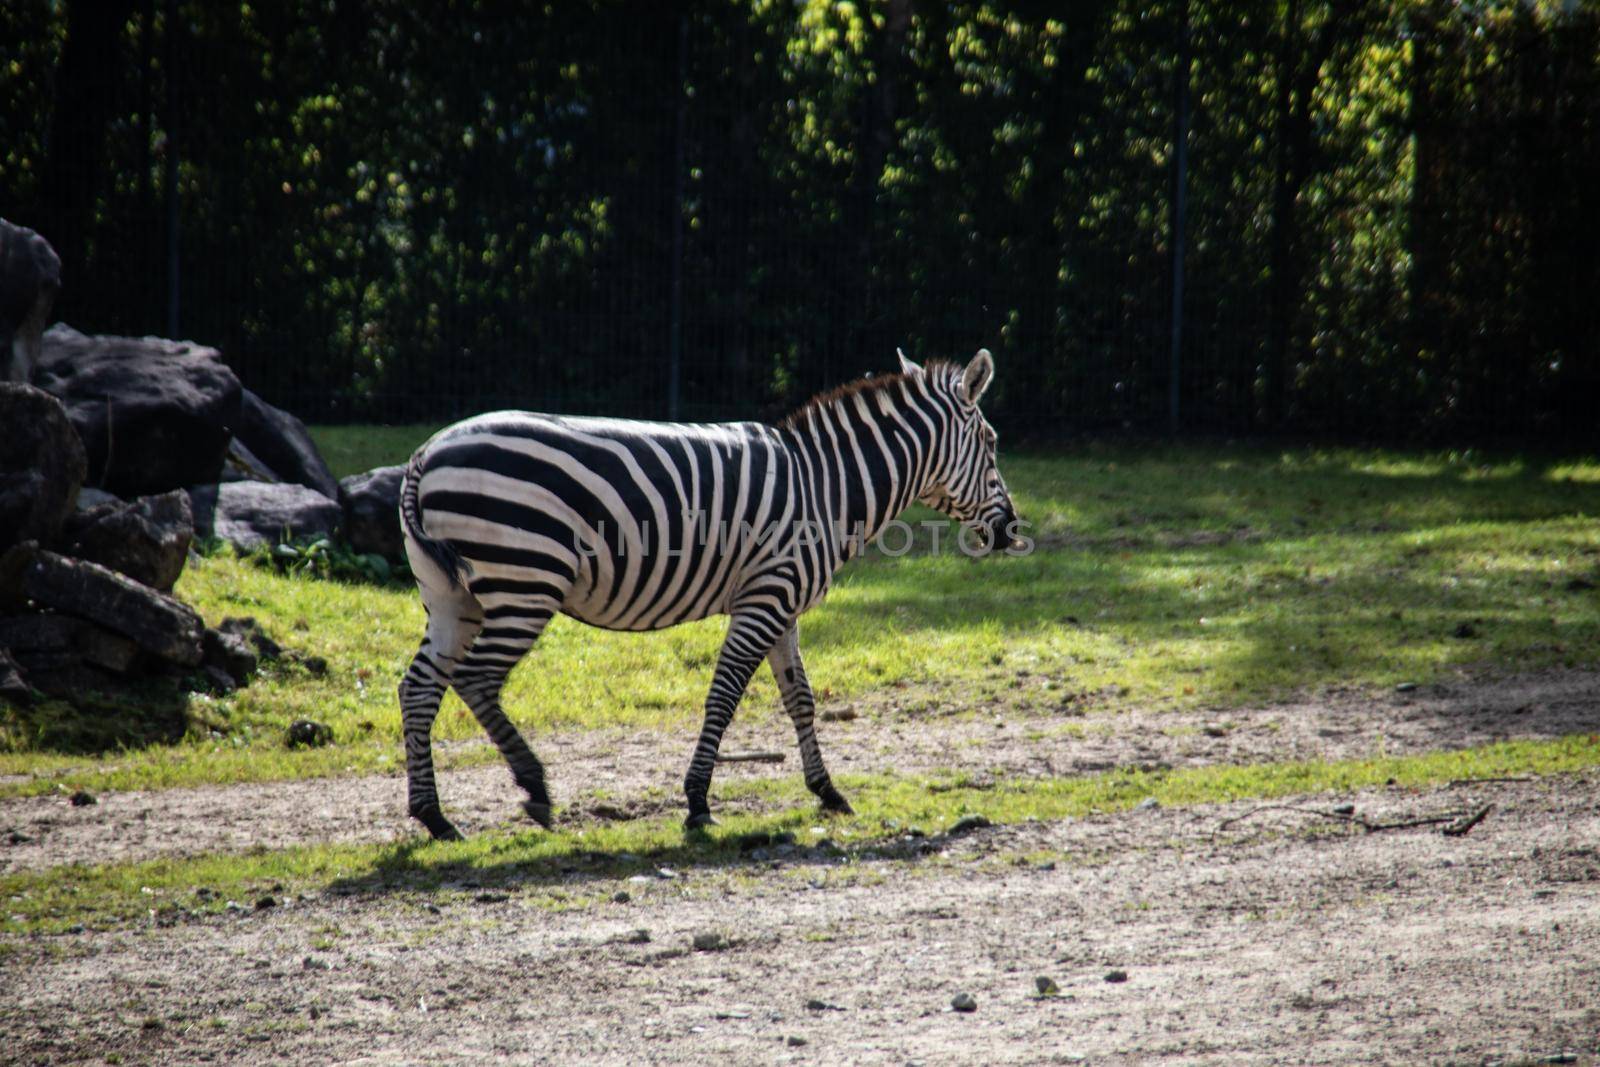 Zebra is in the park looking for food